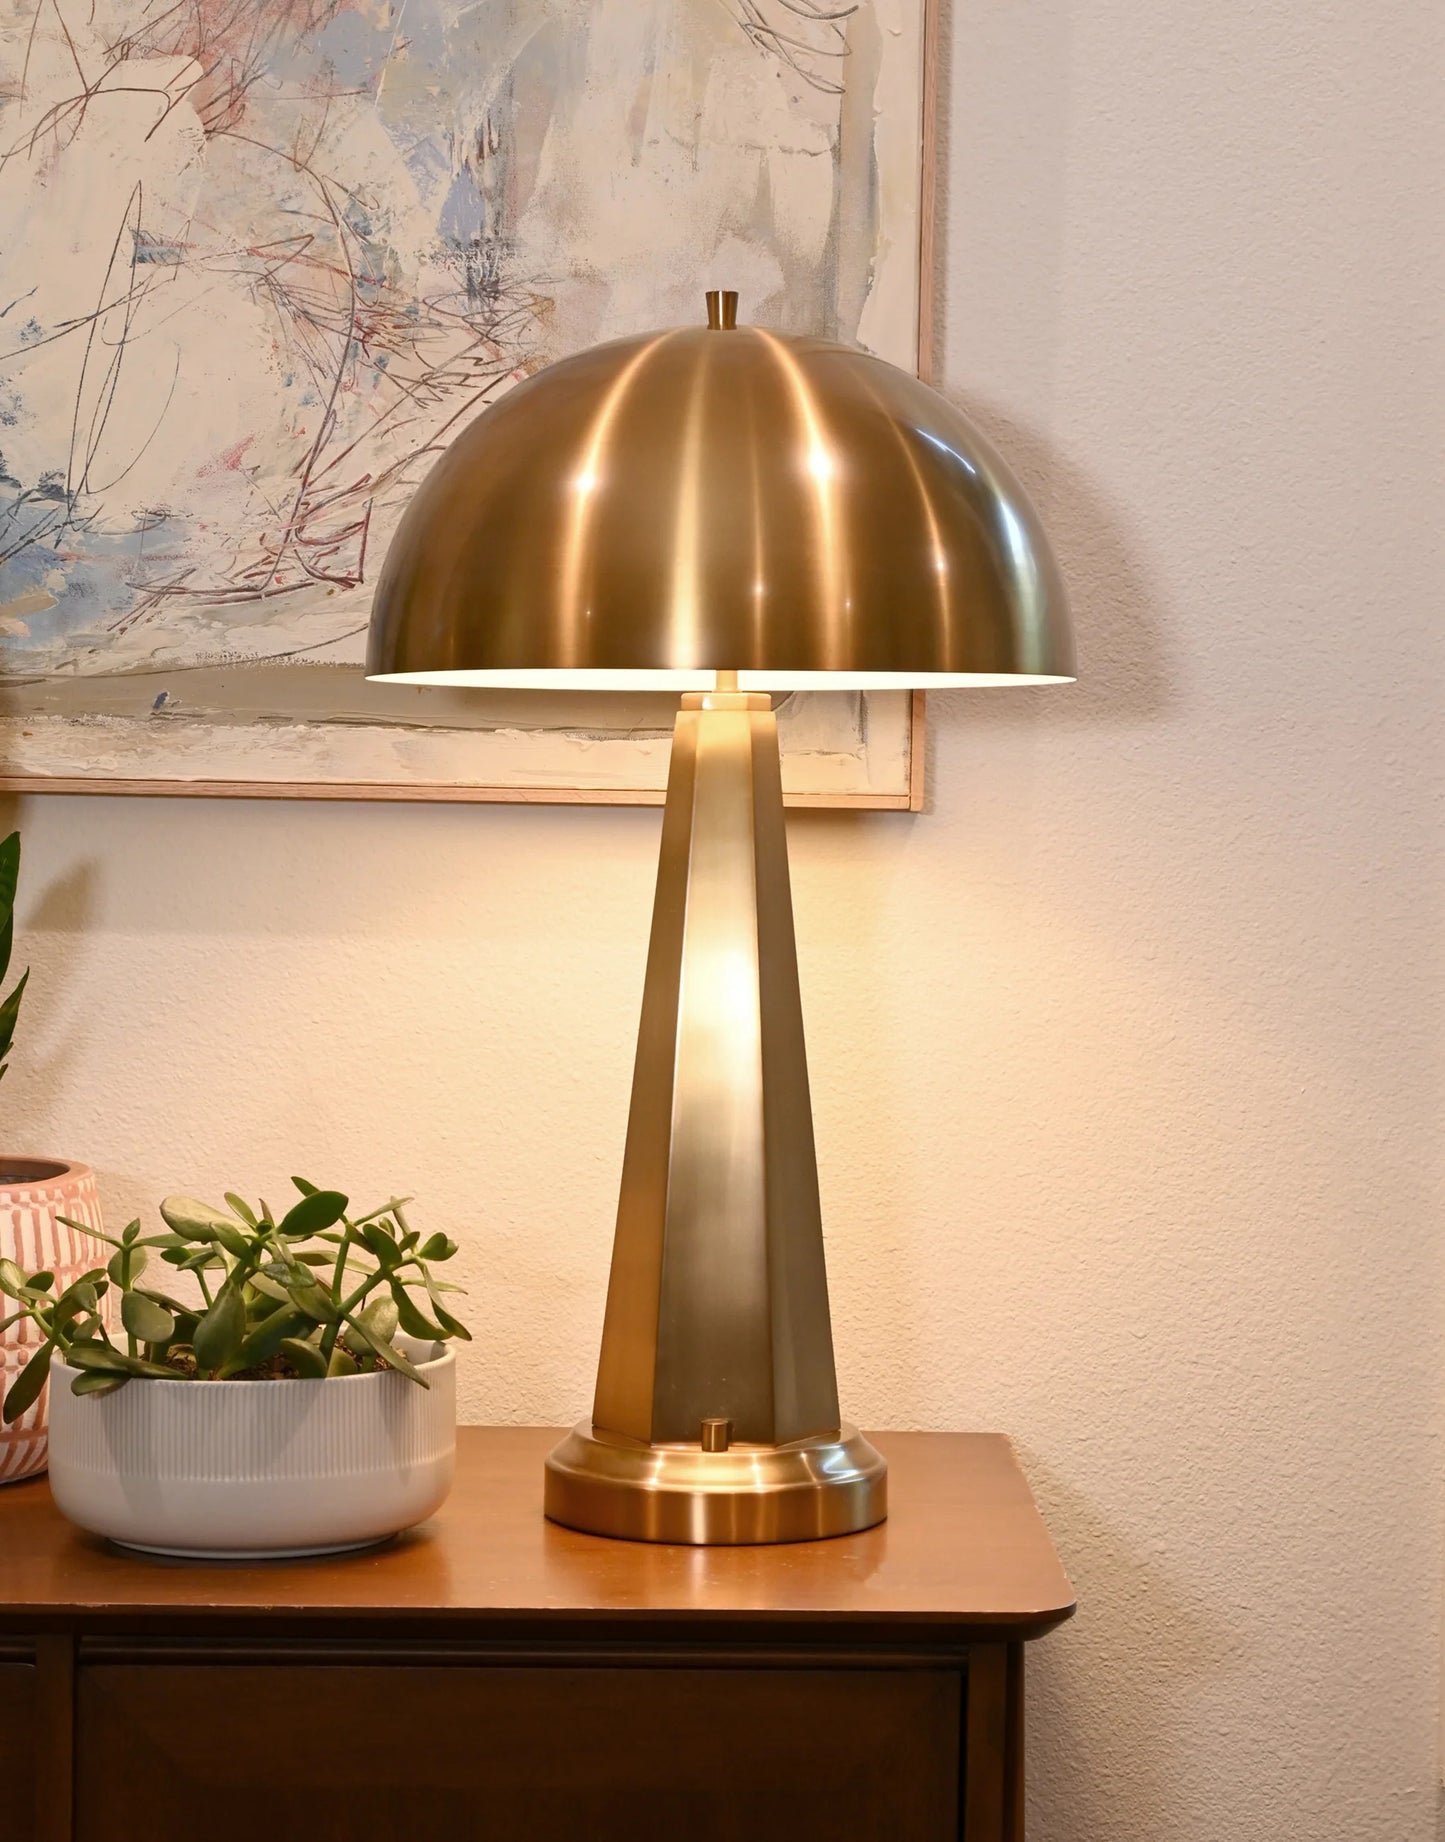 Table Lamp with Antique Brass Finish - Ideal for hotels